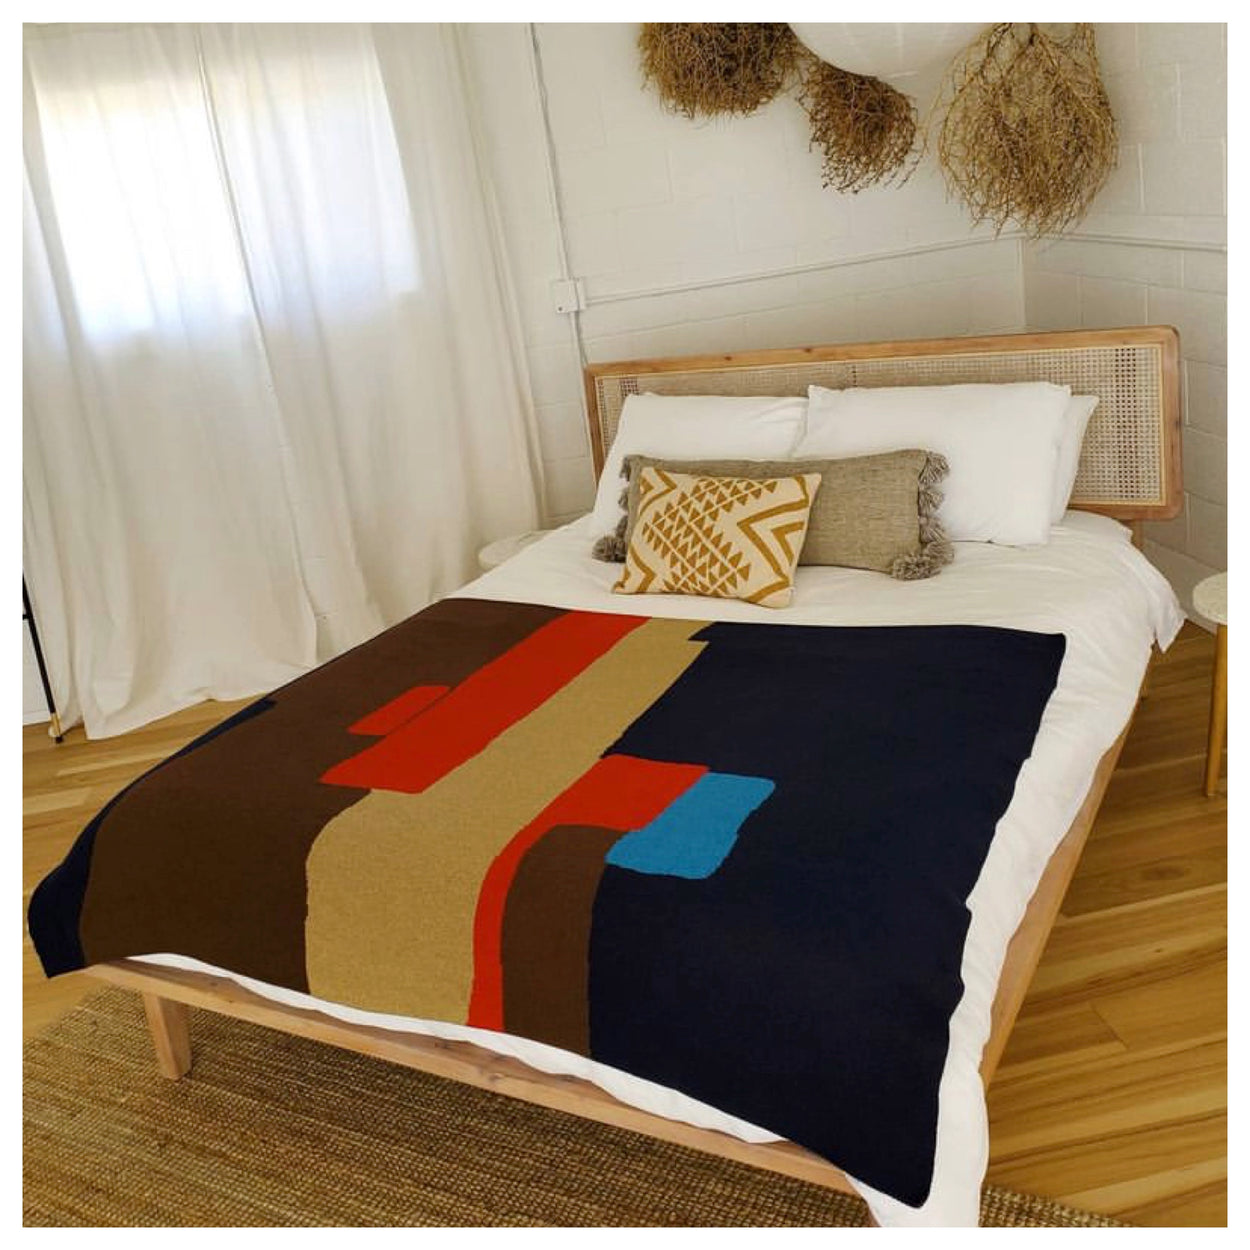 Modern Blue, red, tan and brown cotton knit throw blanket on bed from Civil Dawn Studio